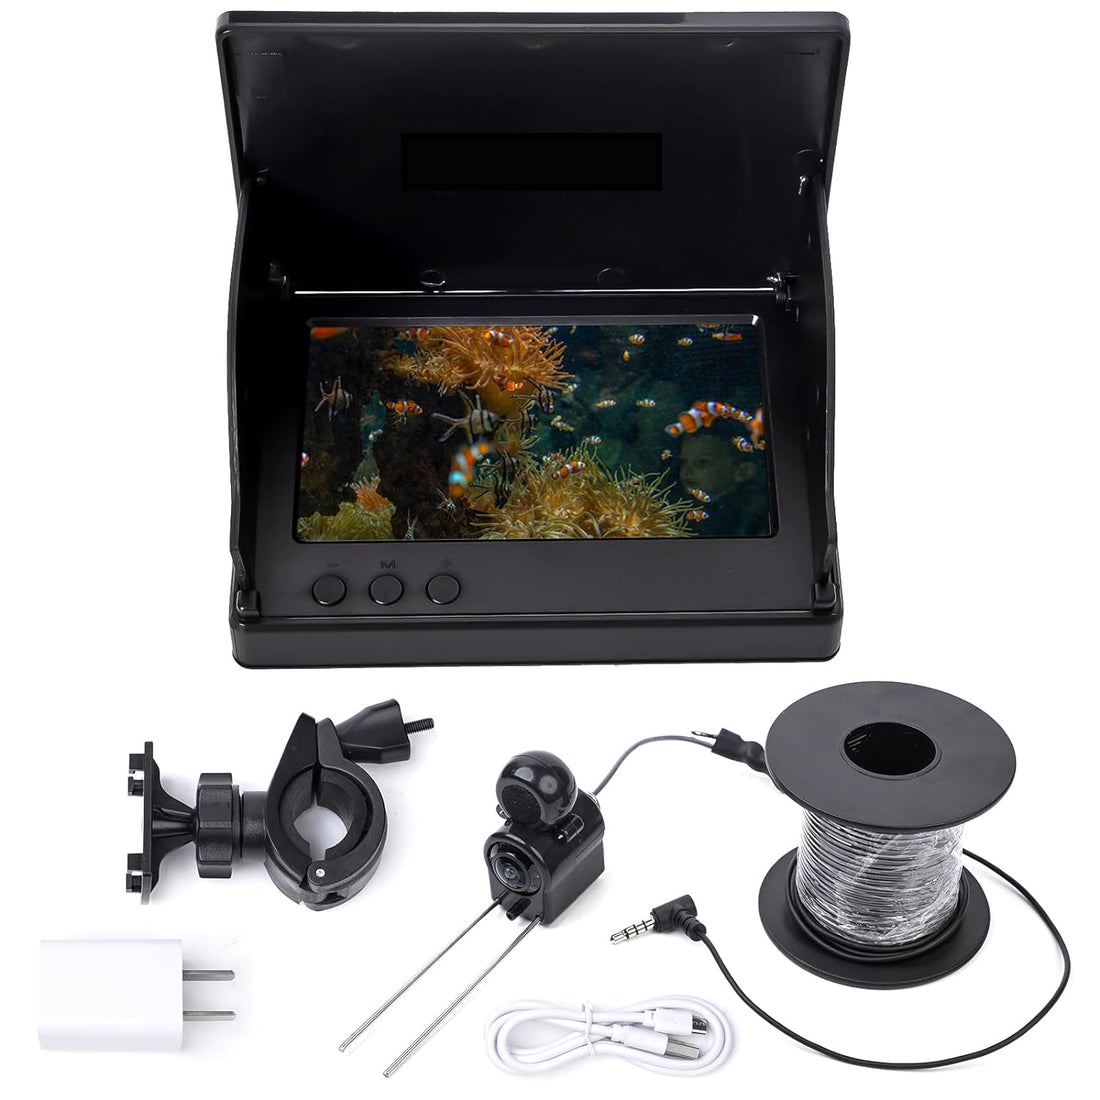 EIOUp Underwater Camera Viewing System– Advanced Under Water Fish Camera with HD Large Display – Underwater Fishing Camera with Infrared Night VisionIce – Ice Fishing Gear – Easy to Use Fish Camera